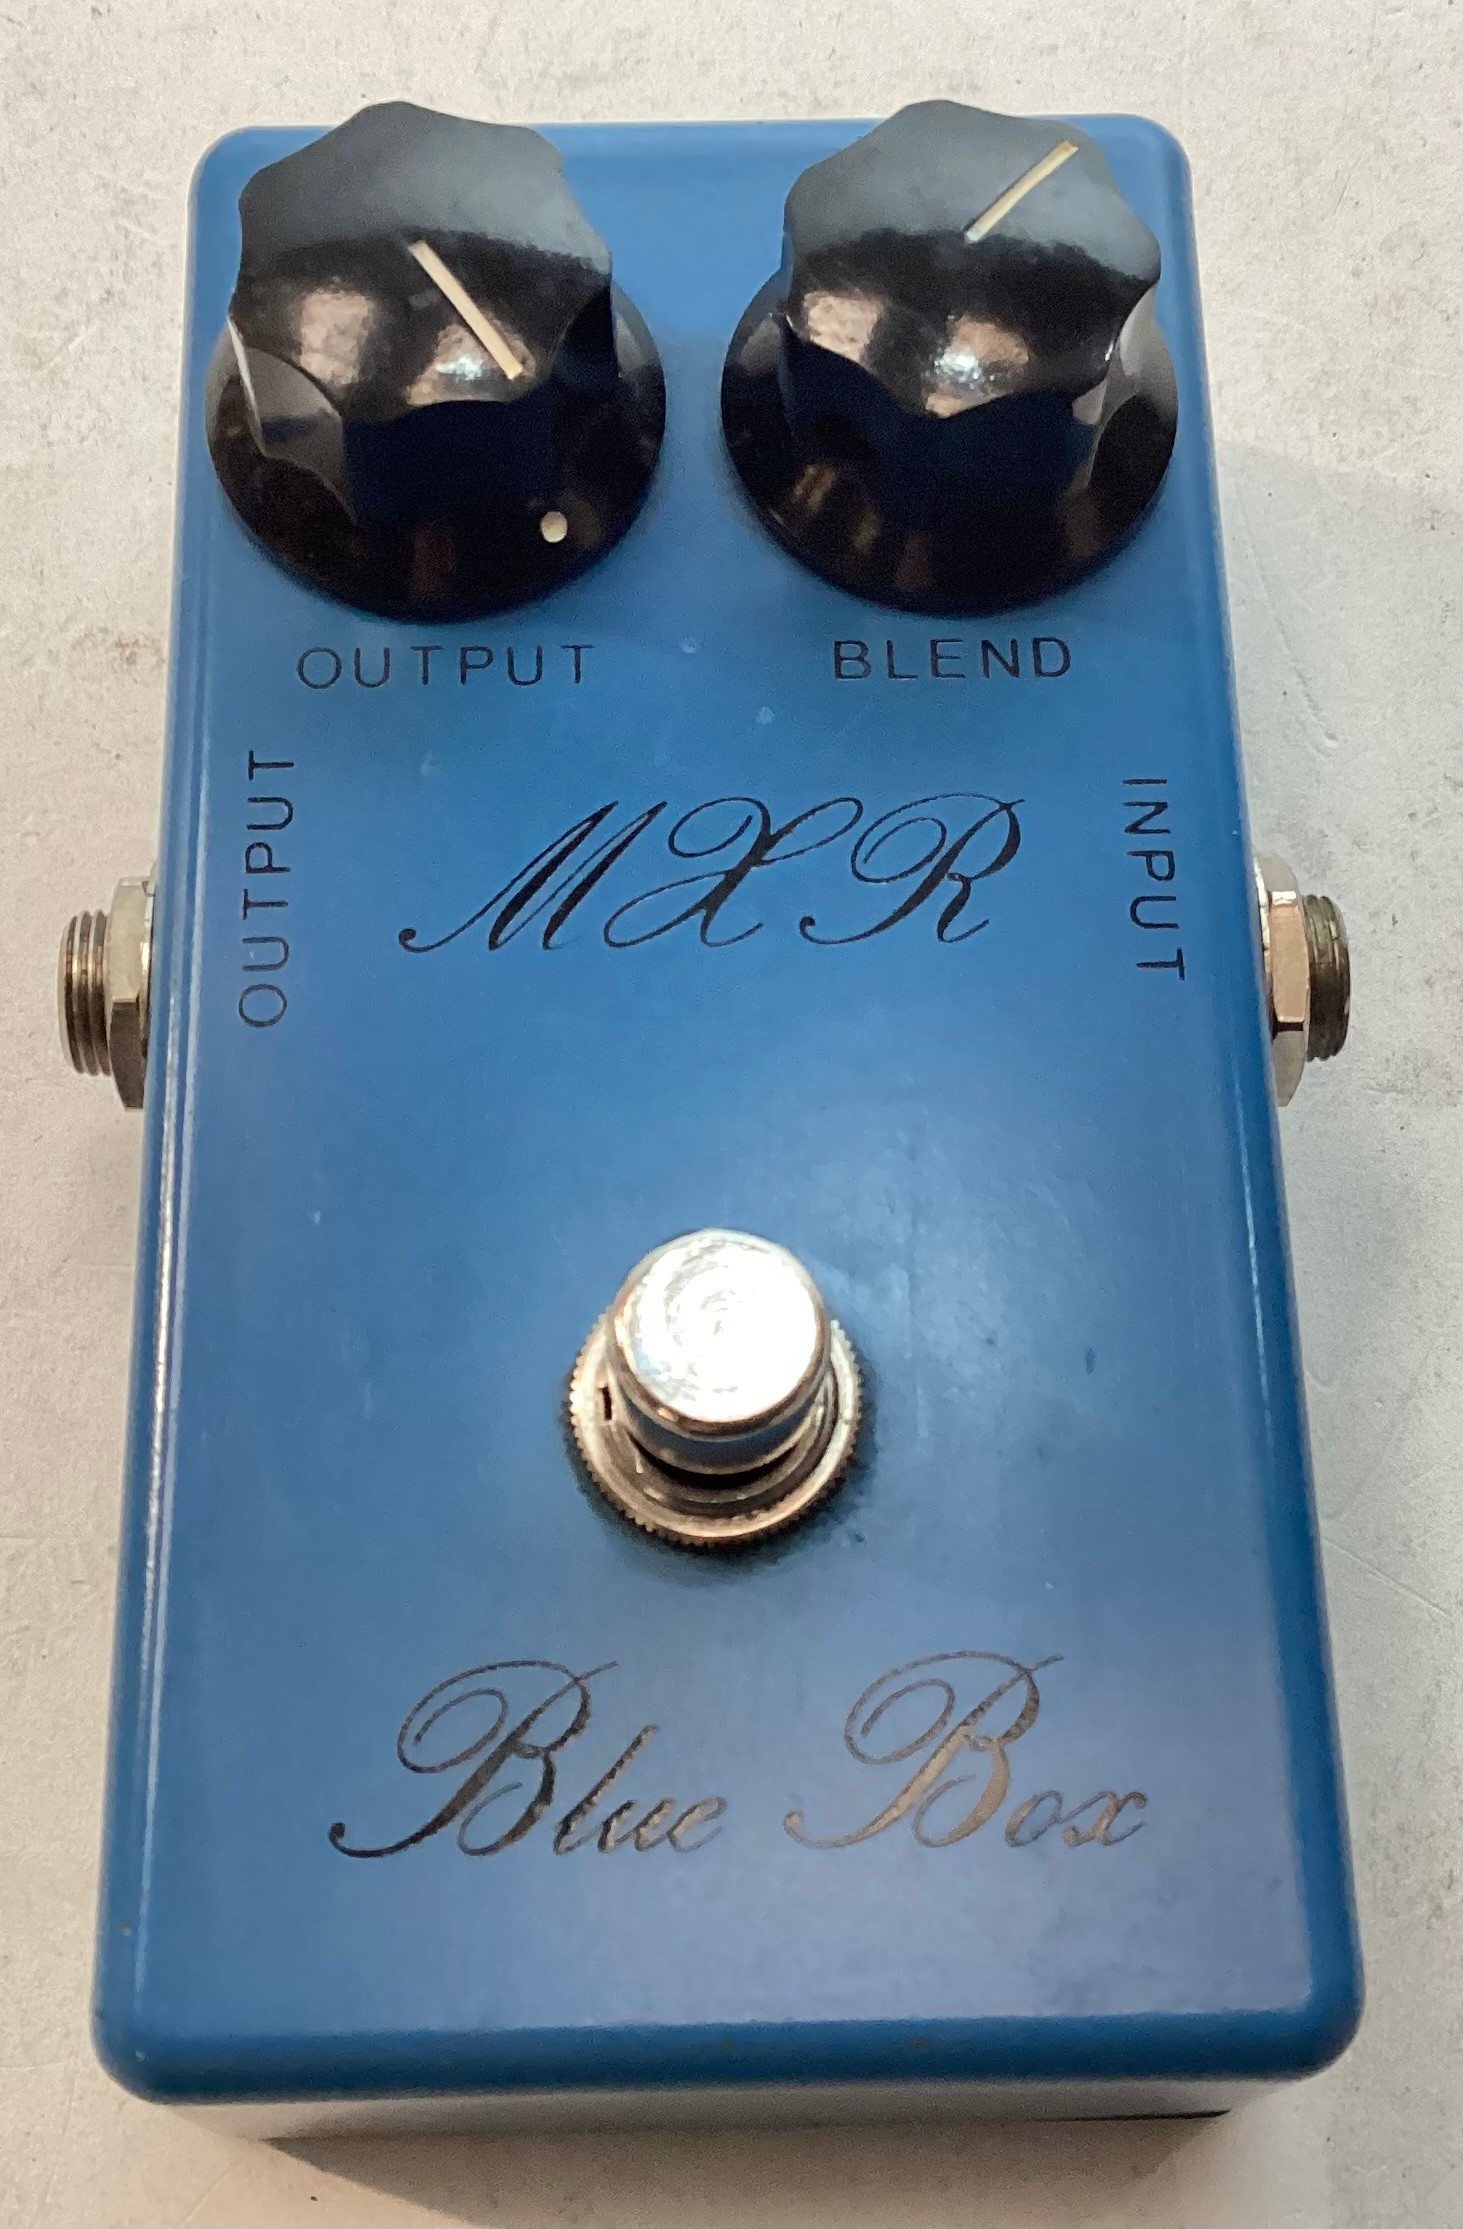 MXR INNOVATIONS BLUE BOX. This is a MXR M-103 Blue Box octave fuzz unit which is in great